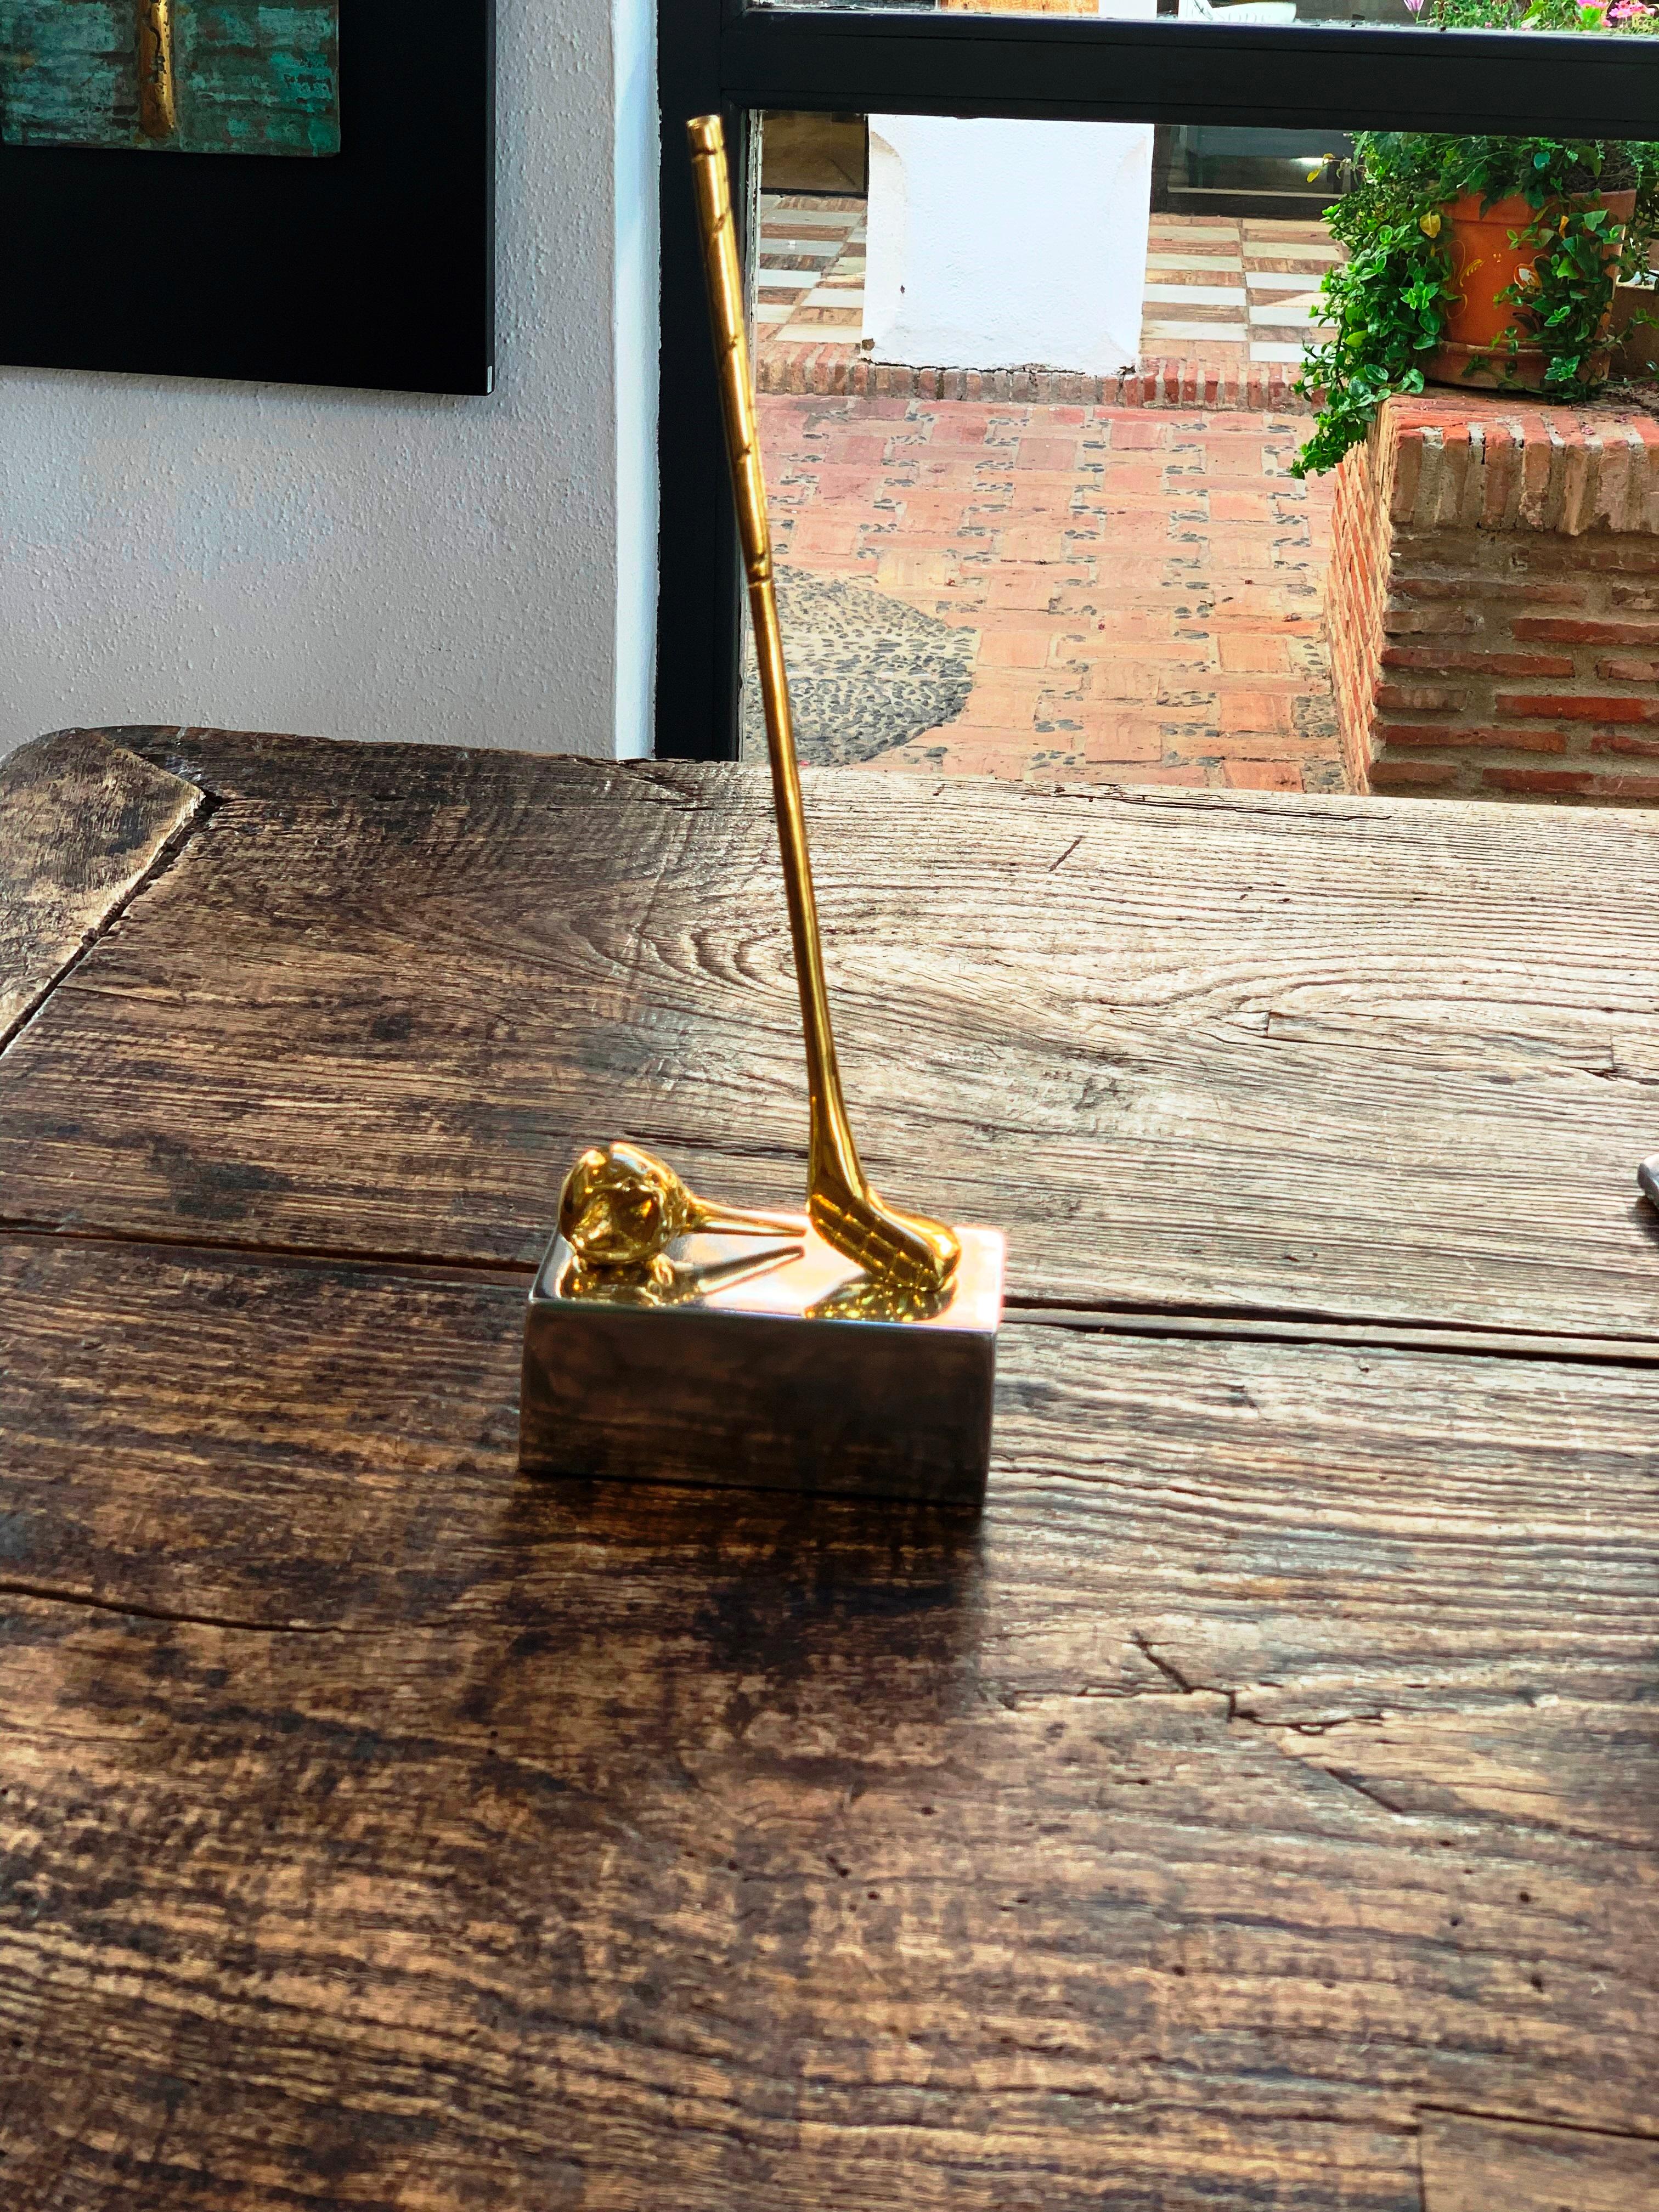 The decorative trophy , was created by David Marshall, it is made of  sand cast brass. 
Handmade, mounted and finished in our foundry and workshop in Spain from recycled materials.
Certified authentic by the Artist David Marshall with his